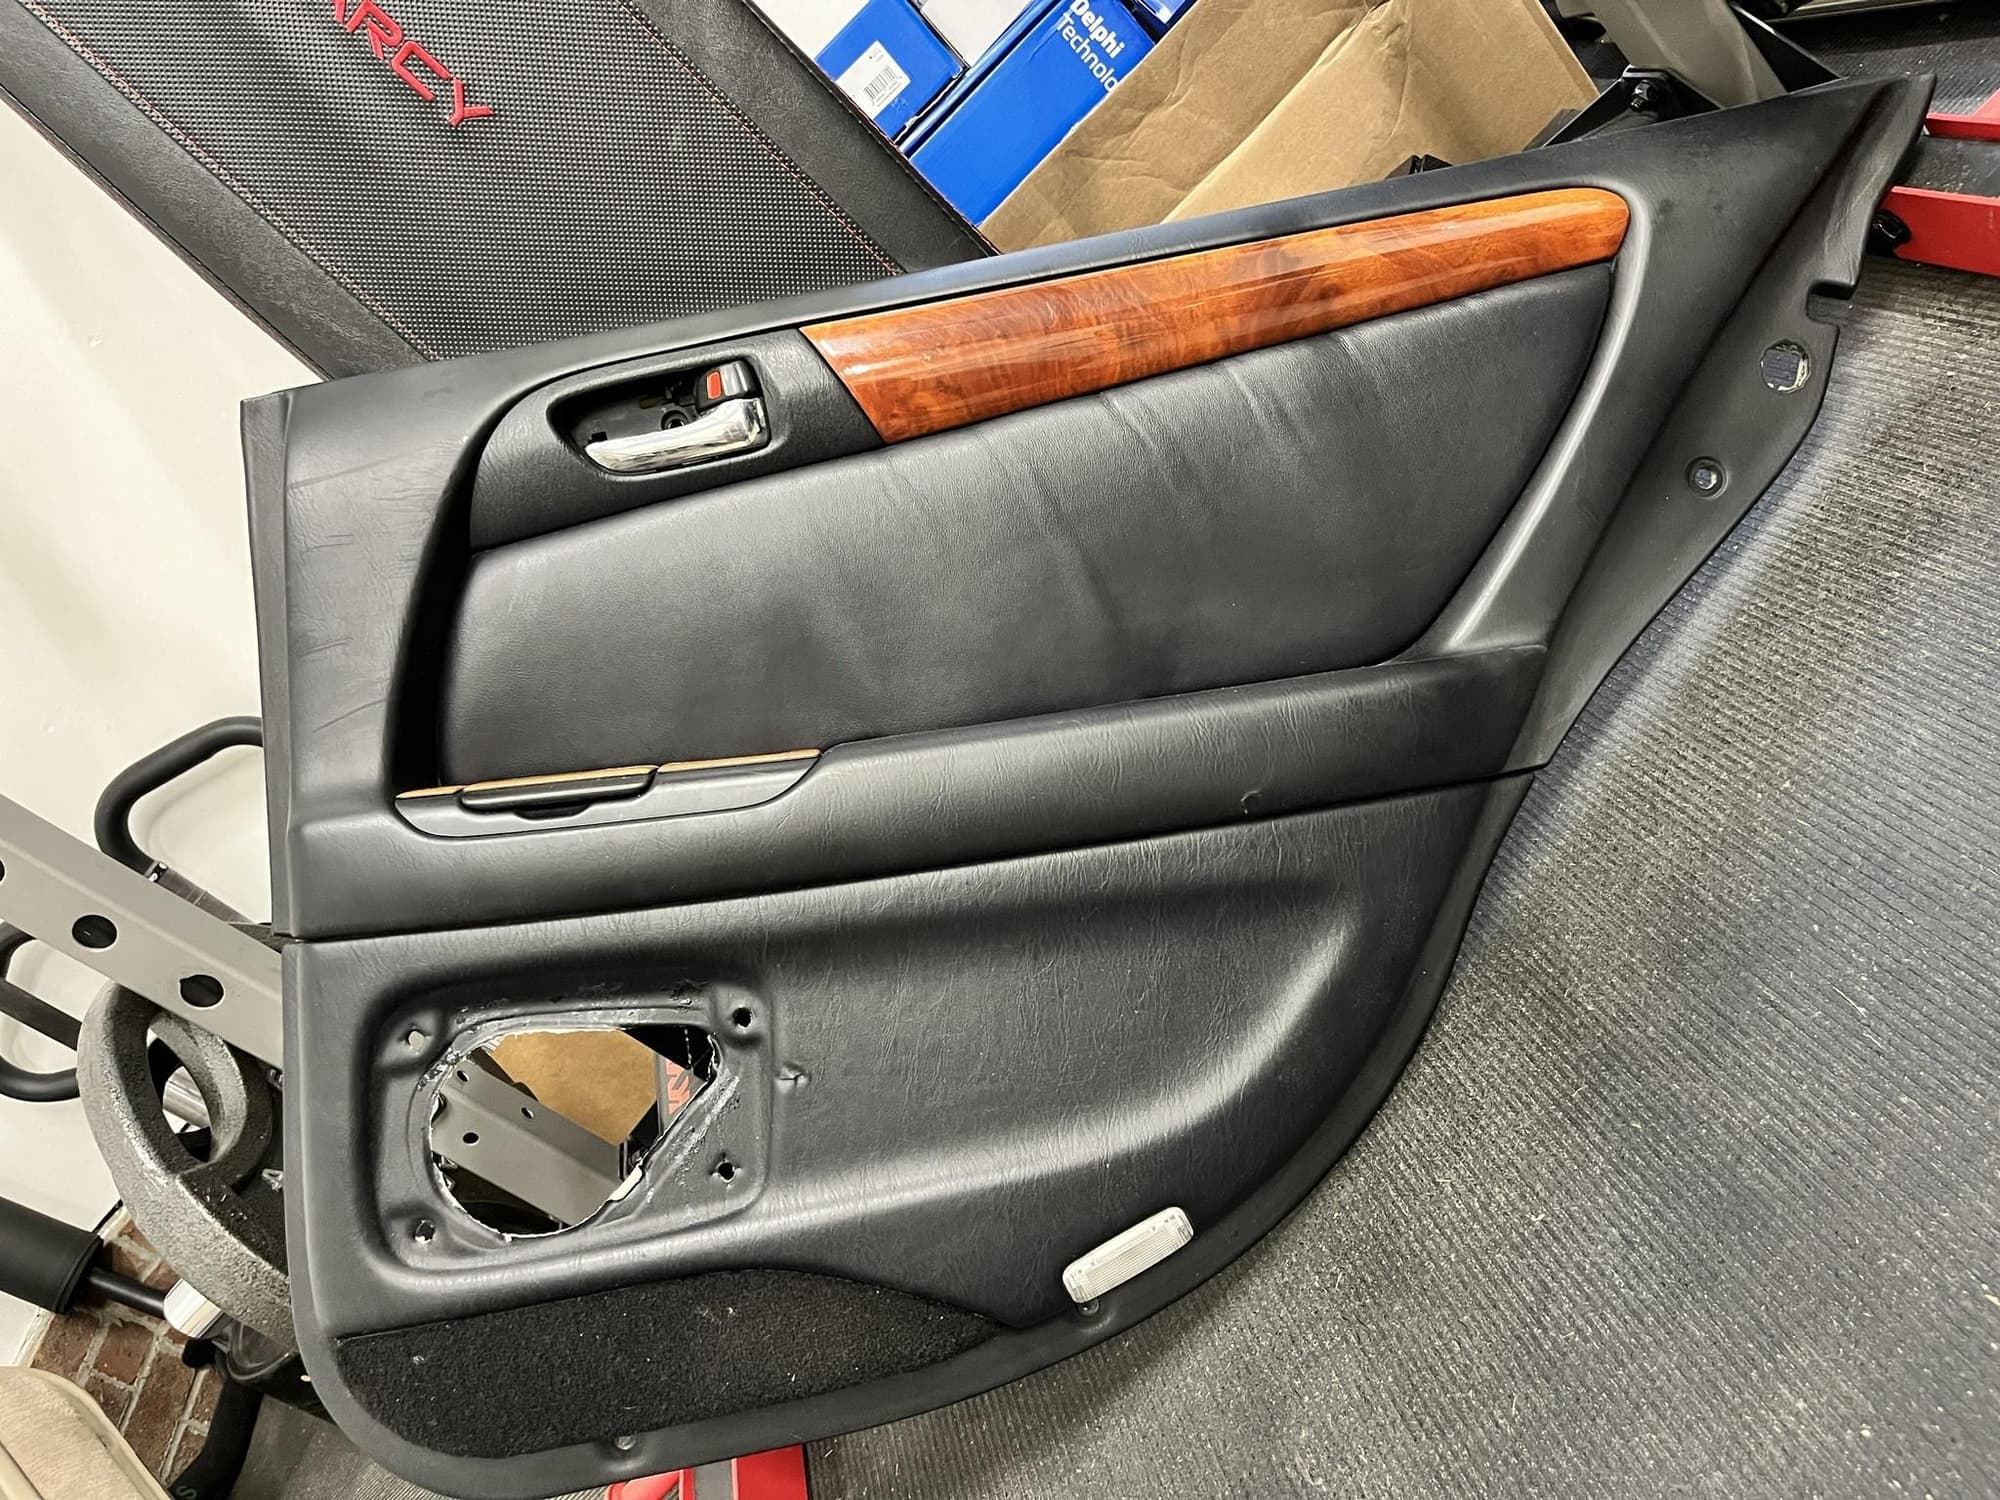 Interior/Upholstery - Black door panels and airbag - Used - 1998 to 2005 Lexus GS - Wake Forest, NC 27587, United States